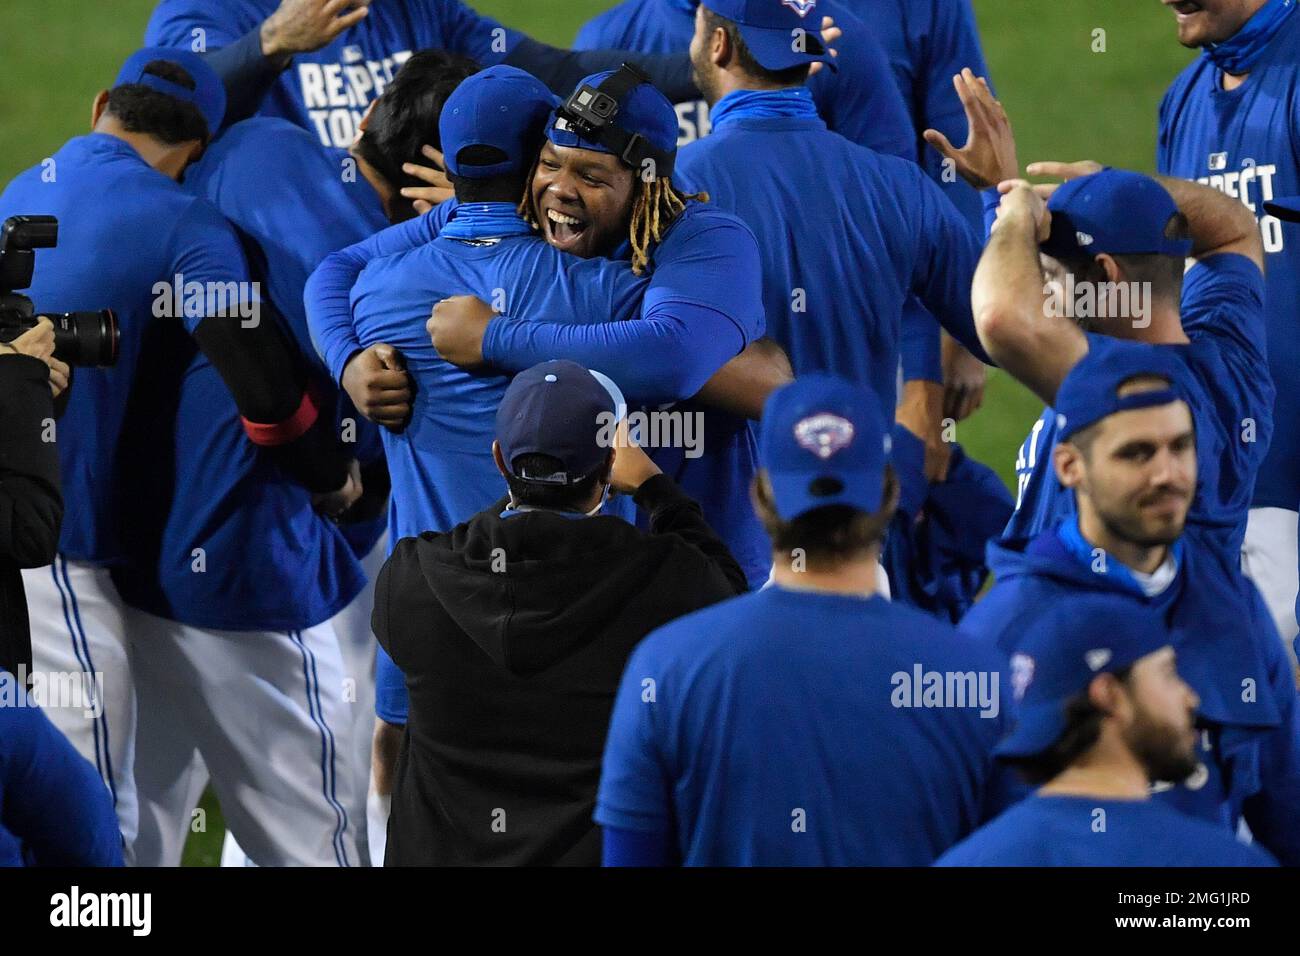 Toronto Blue Jays first baseman Vladimir Guerrero Jr., center, and  teammates celebrate a 4-1 win over the New York Yankees in a baseball game  in Buffalo, N.Y., Thursday, Sept. 24, 2020. Toronto